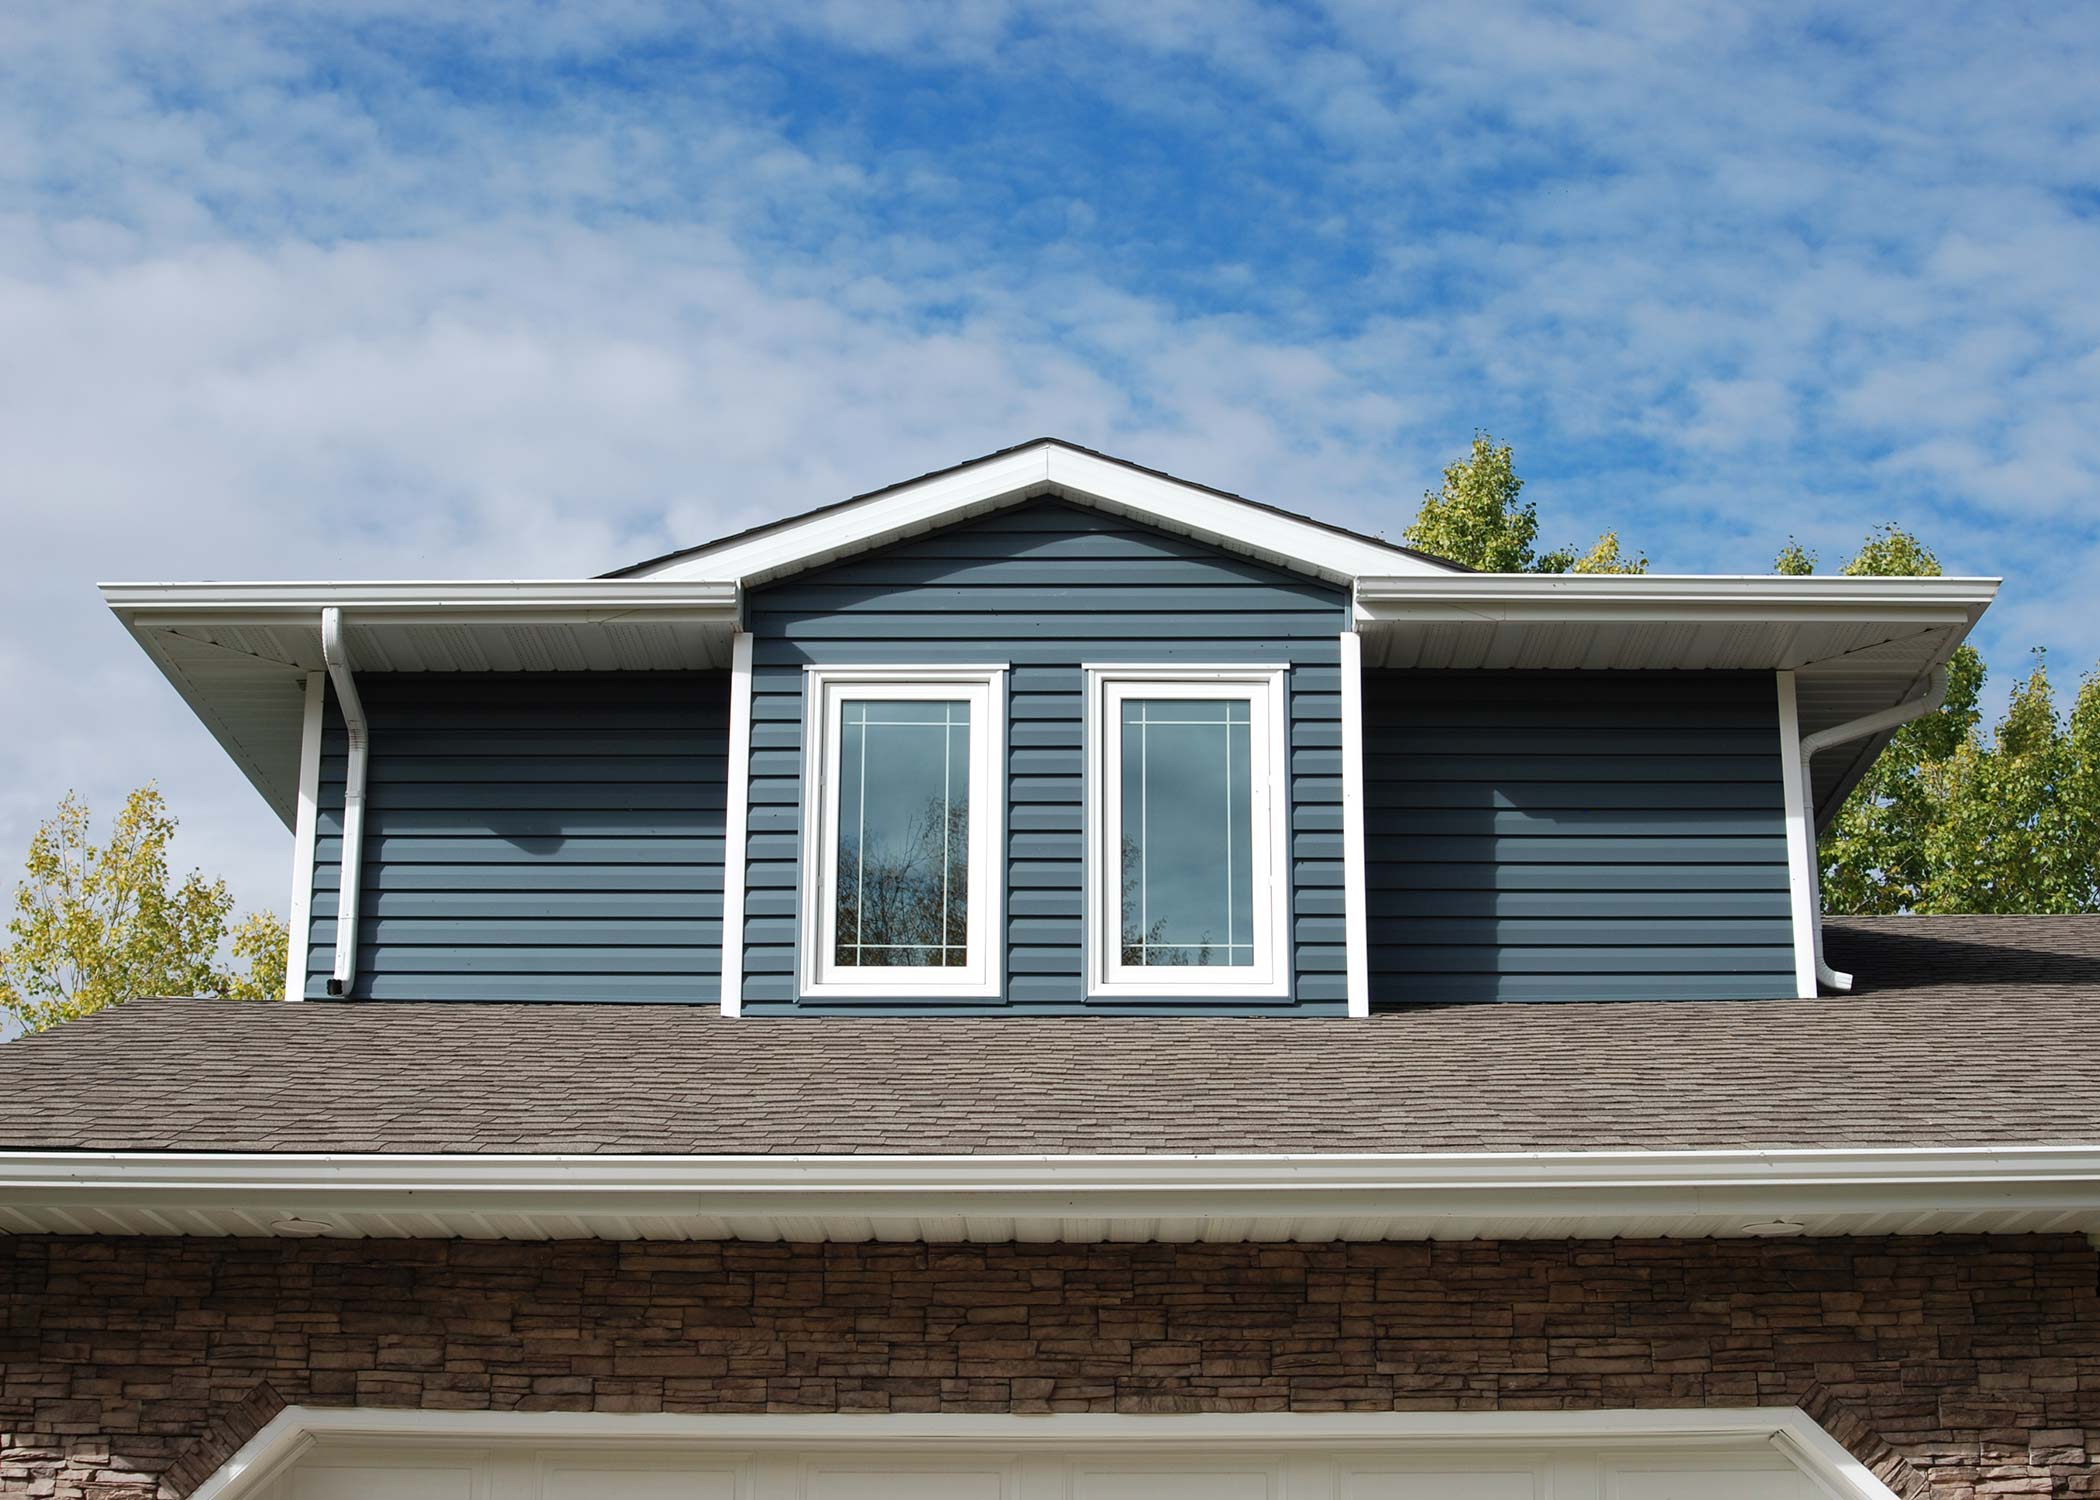 exterior shot of the second storey windows of a house with blue siding